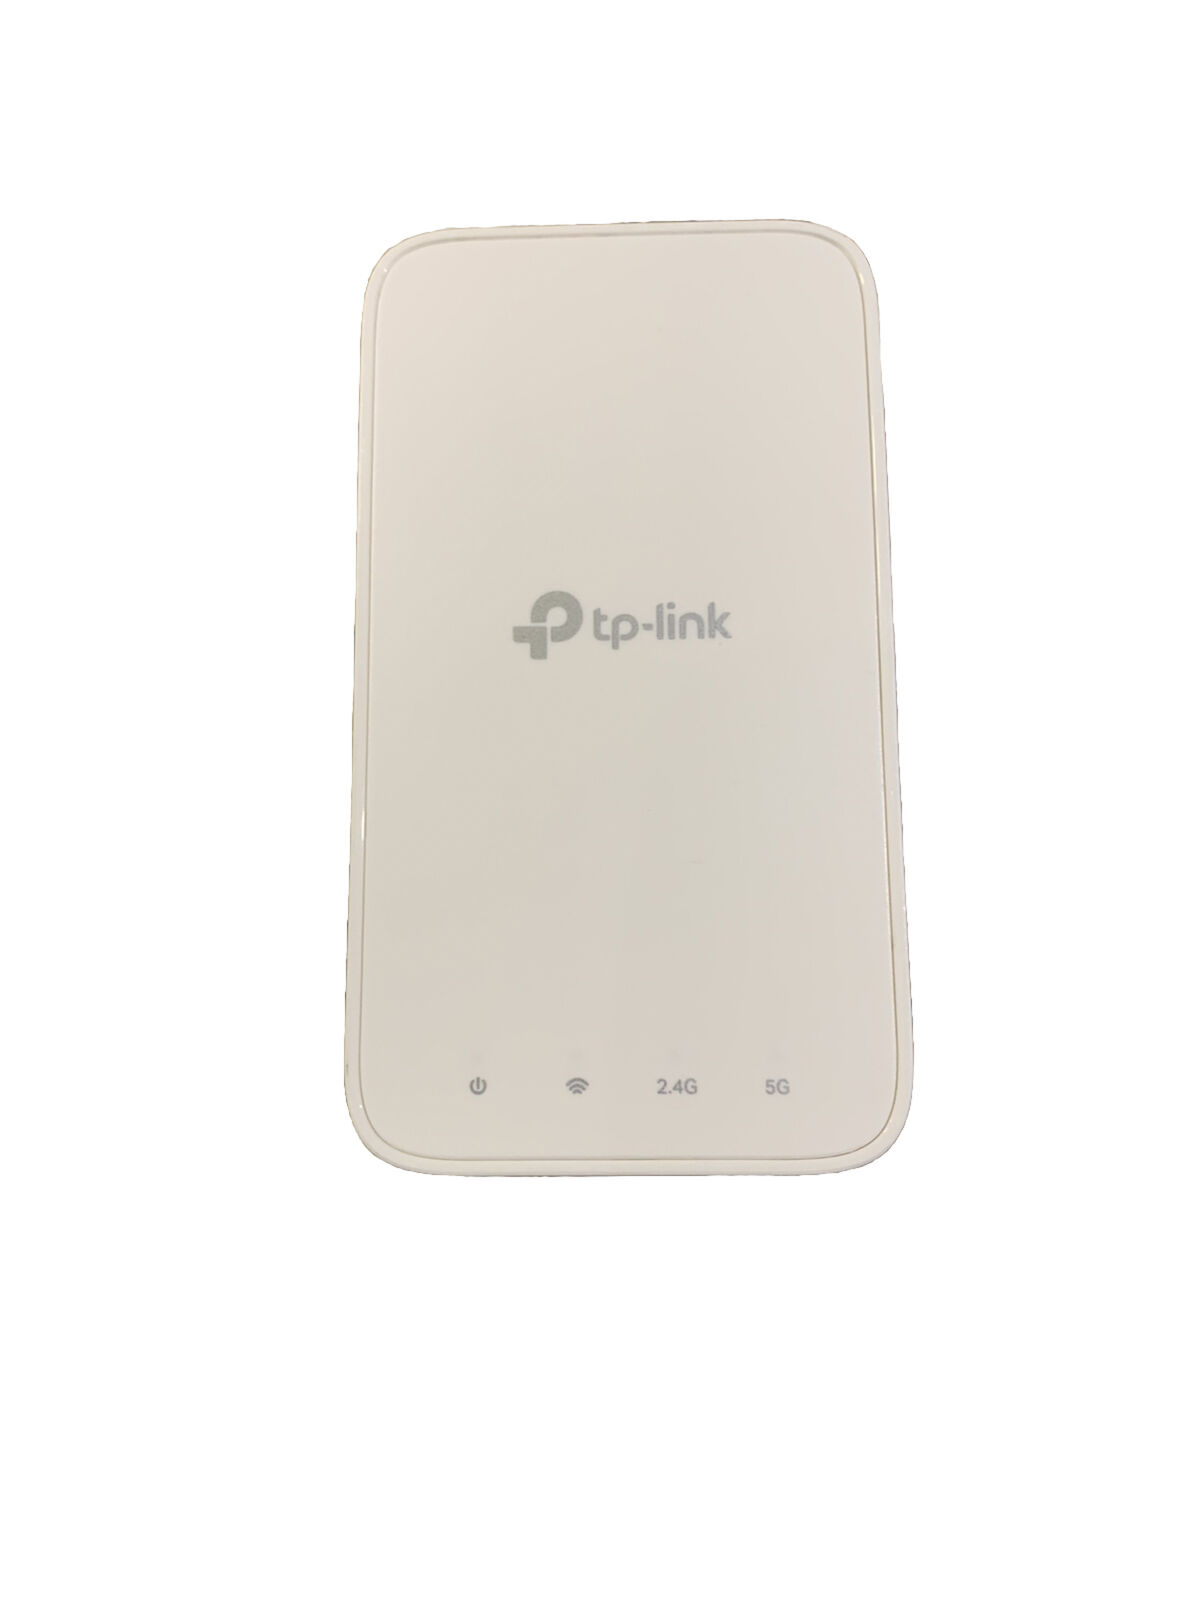 TP-Link Network RE300 AC1200 Mesh Wi-Fi Range Extender 2.4GHz + 5GHz *Tested*